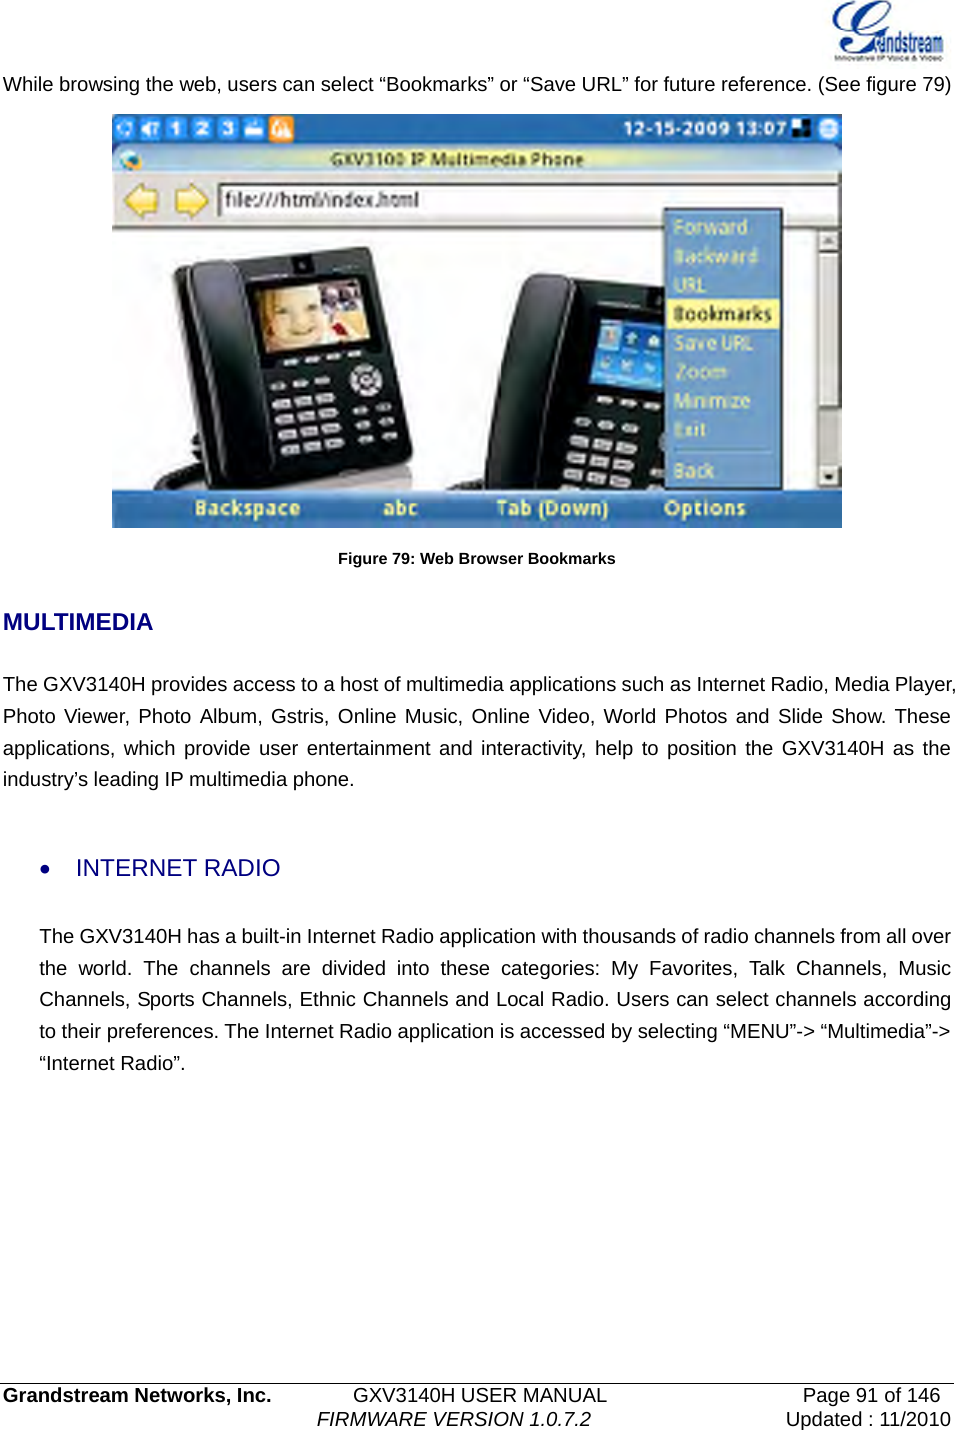   Grandstream Networks, Inc.        GXV3140H USER MANUAL                  Page 91 of 146                                FIRMWARE VERSION 1.0.7.2 Updated : 11/2010  While browsing the web, users can select “Bookmarks” or “Save URL” for future reference. (See figure 79)  Figure 79: Web Browser Bookmarks  MULTIMEDIA  The GXV3140H provides access to a host of multimedia applications such as Internet Radio, Media Player, Photo Viewer, Photo Album, Gstris, Online Music, Online Video, World Photos and Slide Show. These applications, which provide user entertainment and interactivity, help to position the GXV3140H as the industry’s leading IP multimedia phone.    • INTERNET RADIO  The GXV3140H has a built-in Internet Radio application with thousands of radio channels from all over the world. The channels are divided into these categories: My Favorites, Talk Channels, Music Channels, Sports Channels, Ethnic Channels and Local Radio. Users can select channels according to their preferences. The Internet Radio application is accessed by selecting “MENU”-&gt; “Multimedia”-&gt; “Internet Radio”. 